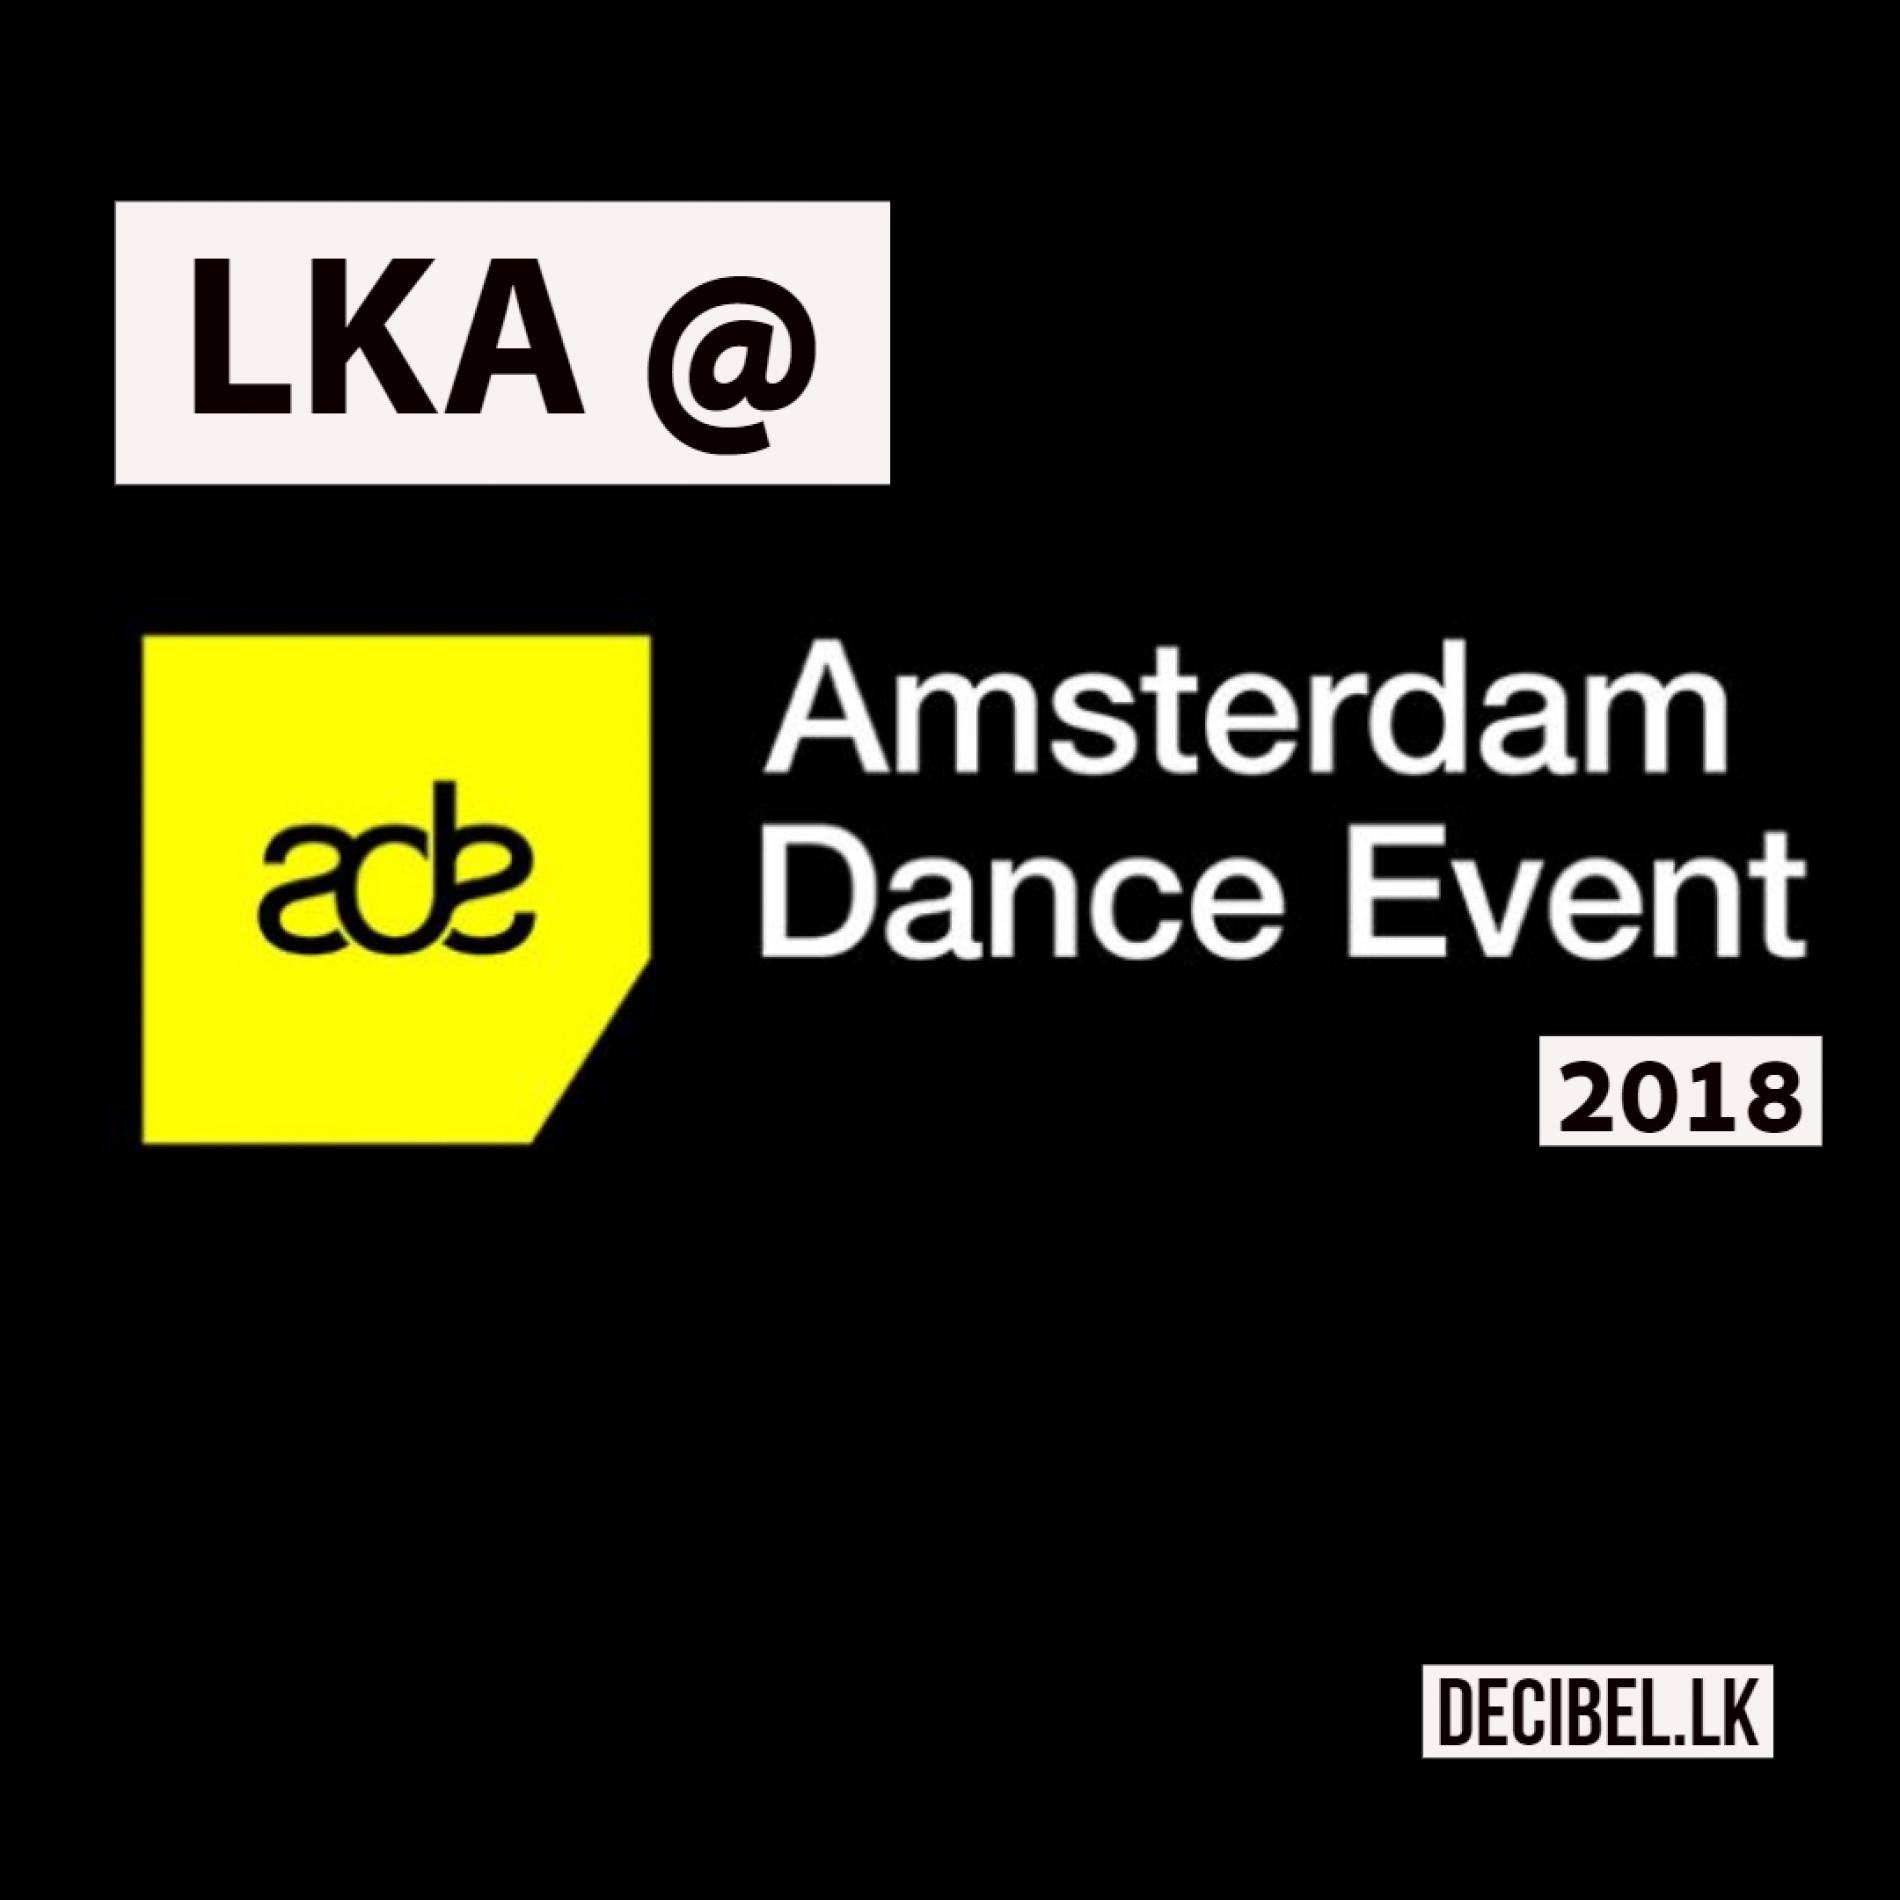 Lanka Is Being Repped At Amsterdam Dance Event